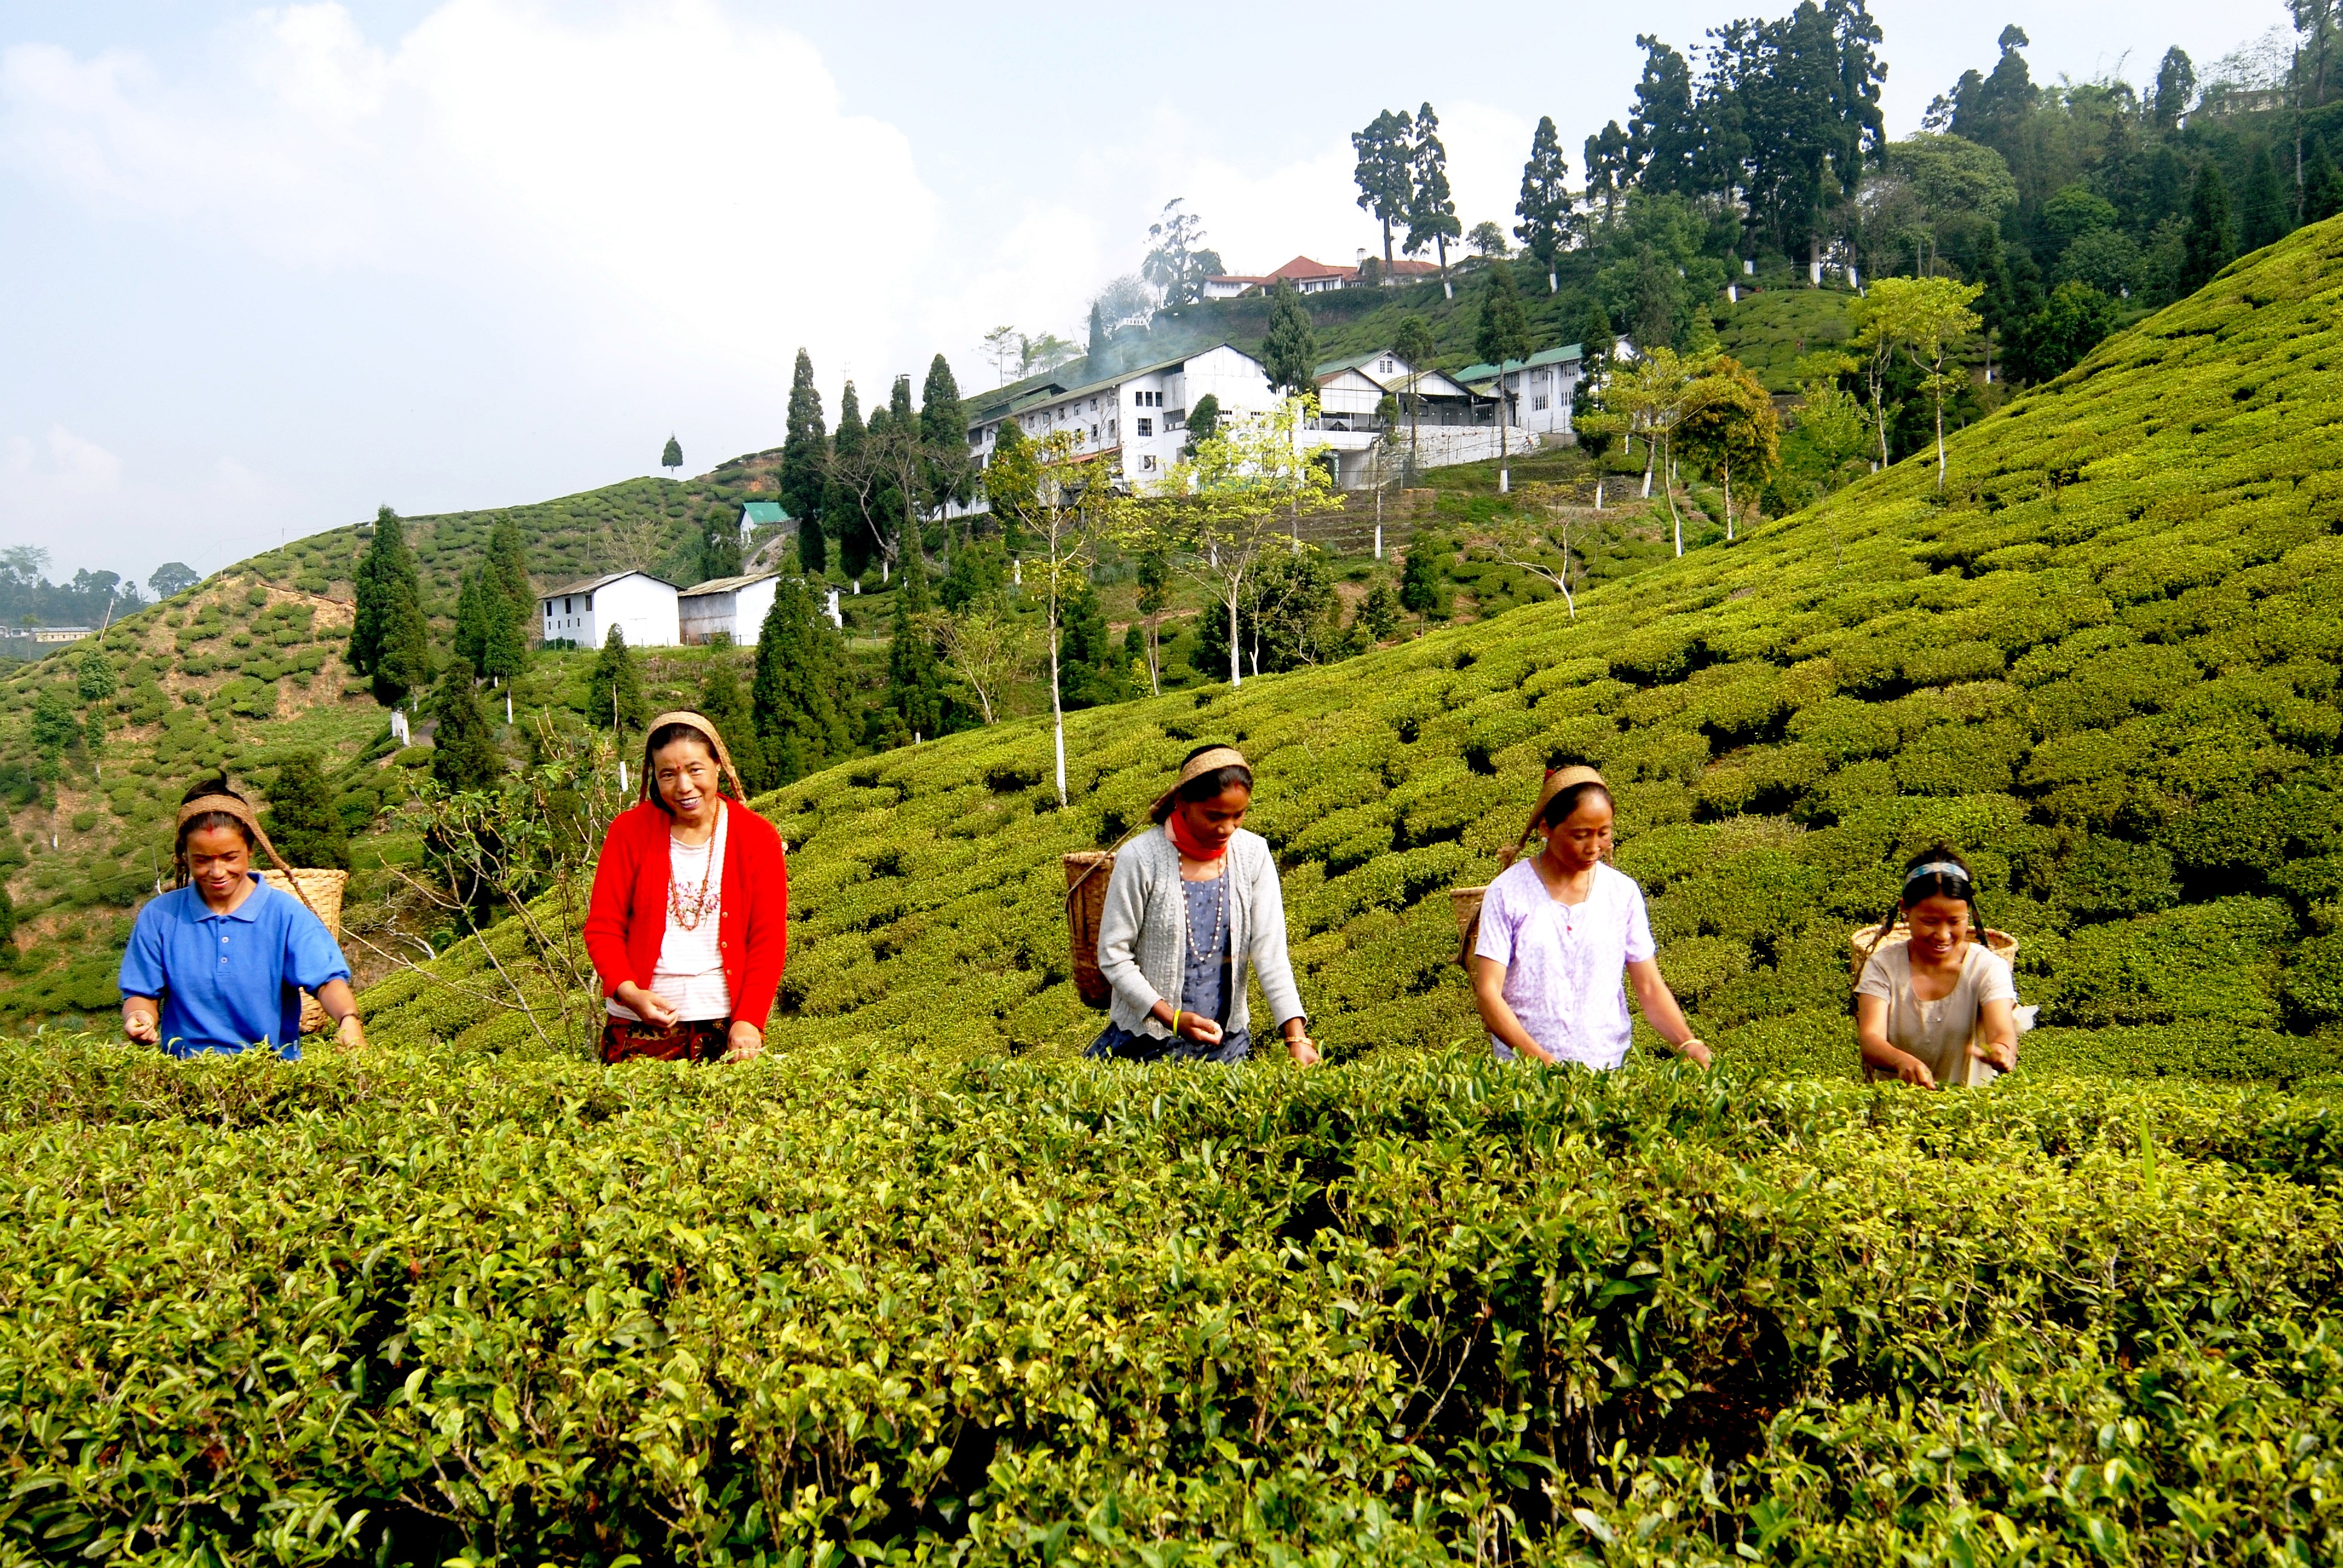 Description: First planted in the early 1800s, the incomparable quality of Darjeeling Teas is the result of its locational climate, soil conditions, altitude and meticulous processing. About 10 million kilograms are grown every year, spread over 17,500 hectares of land. The tea has its own special aroma, that rare fragrance that fills the senses. Tea from Darjeeling has been savored by connoisseurs all over the world. Like all luxury brands Darjeeling Tea is aspired to, worldwide.